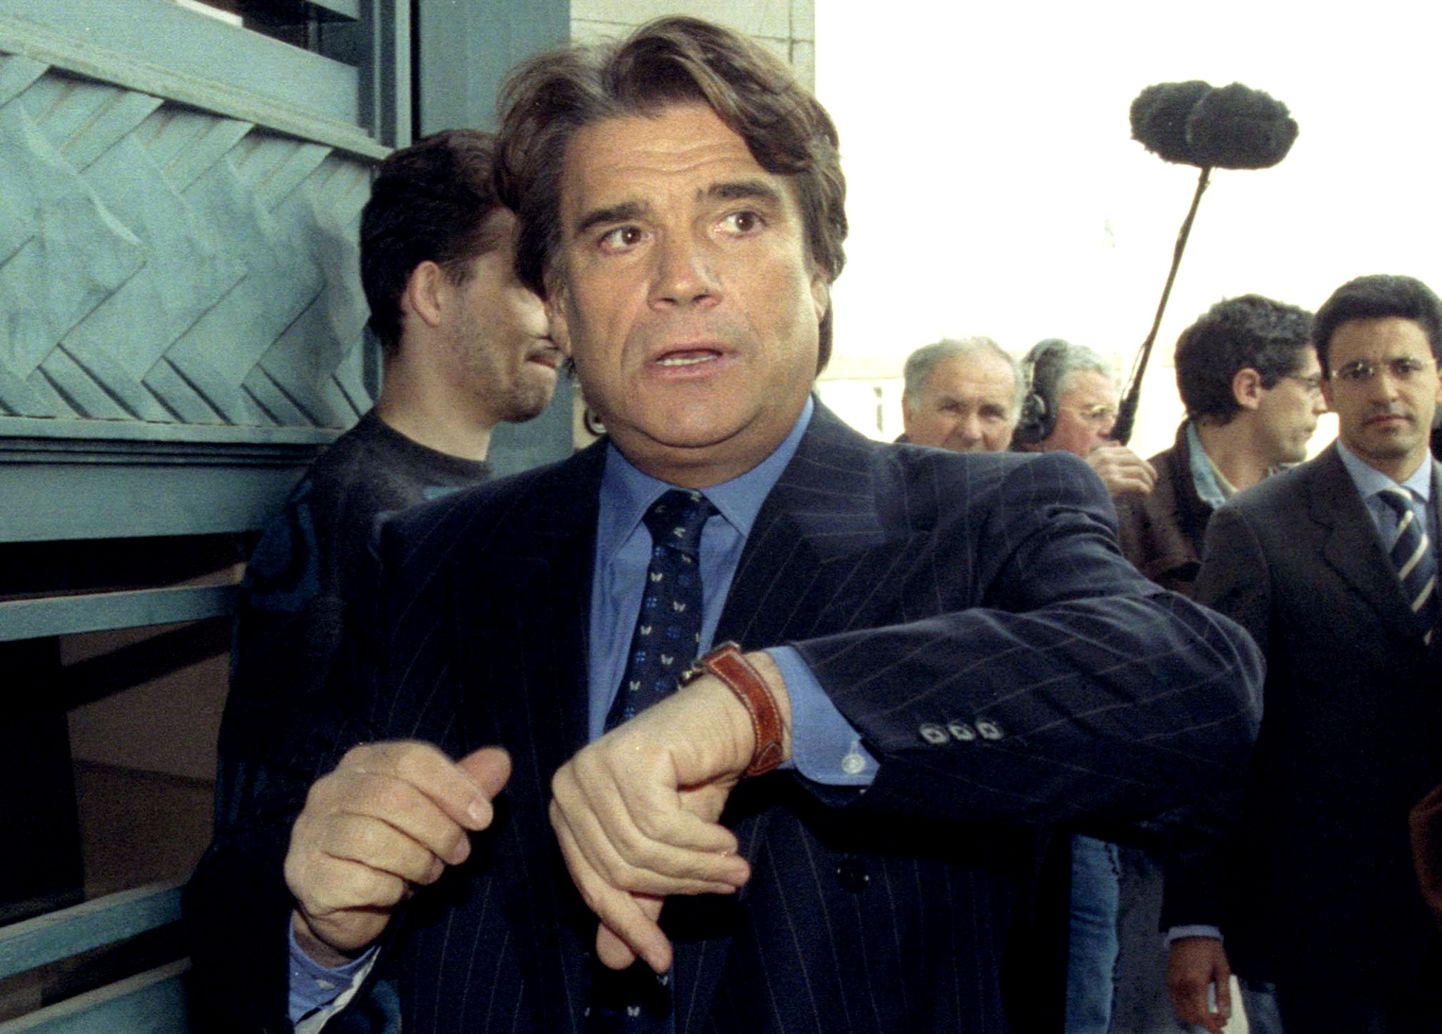 Former French tycoon Bernard Tapie arrives at court in a fraud trial over his defunct business empire, March 18, 1996. Tapie, a former cabinet minister, faces up to five years in prison if found guilty on charges of misusing corportate funds of his Testut scale company . REUTERS/Pascal Rossignol